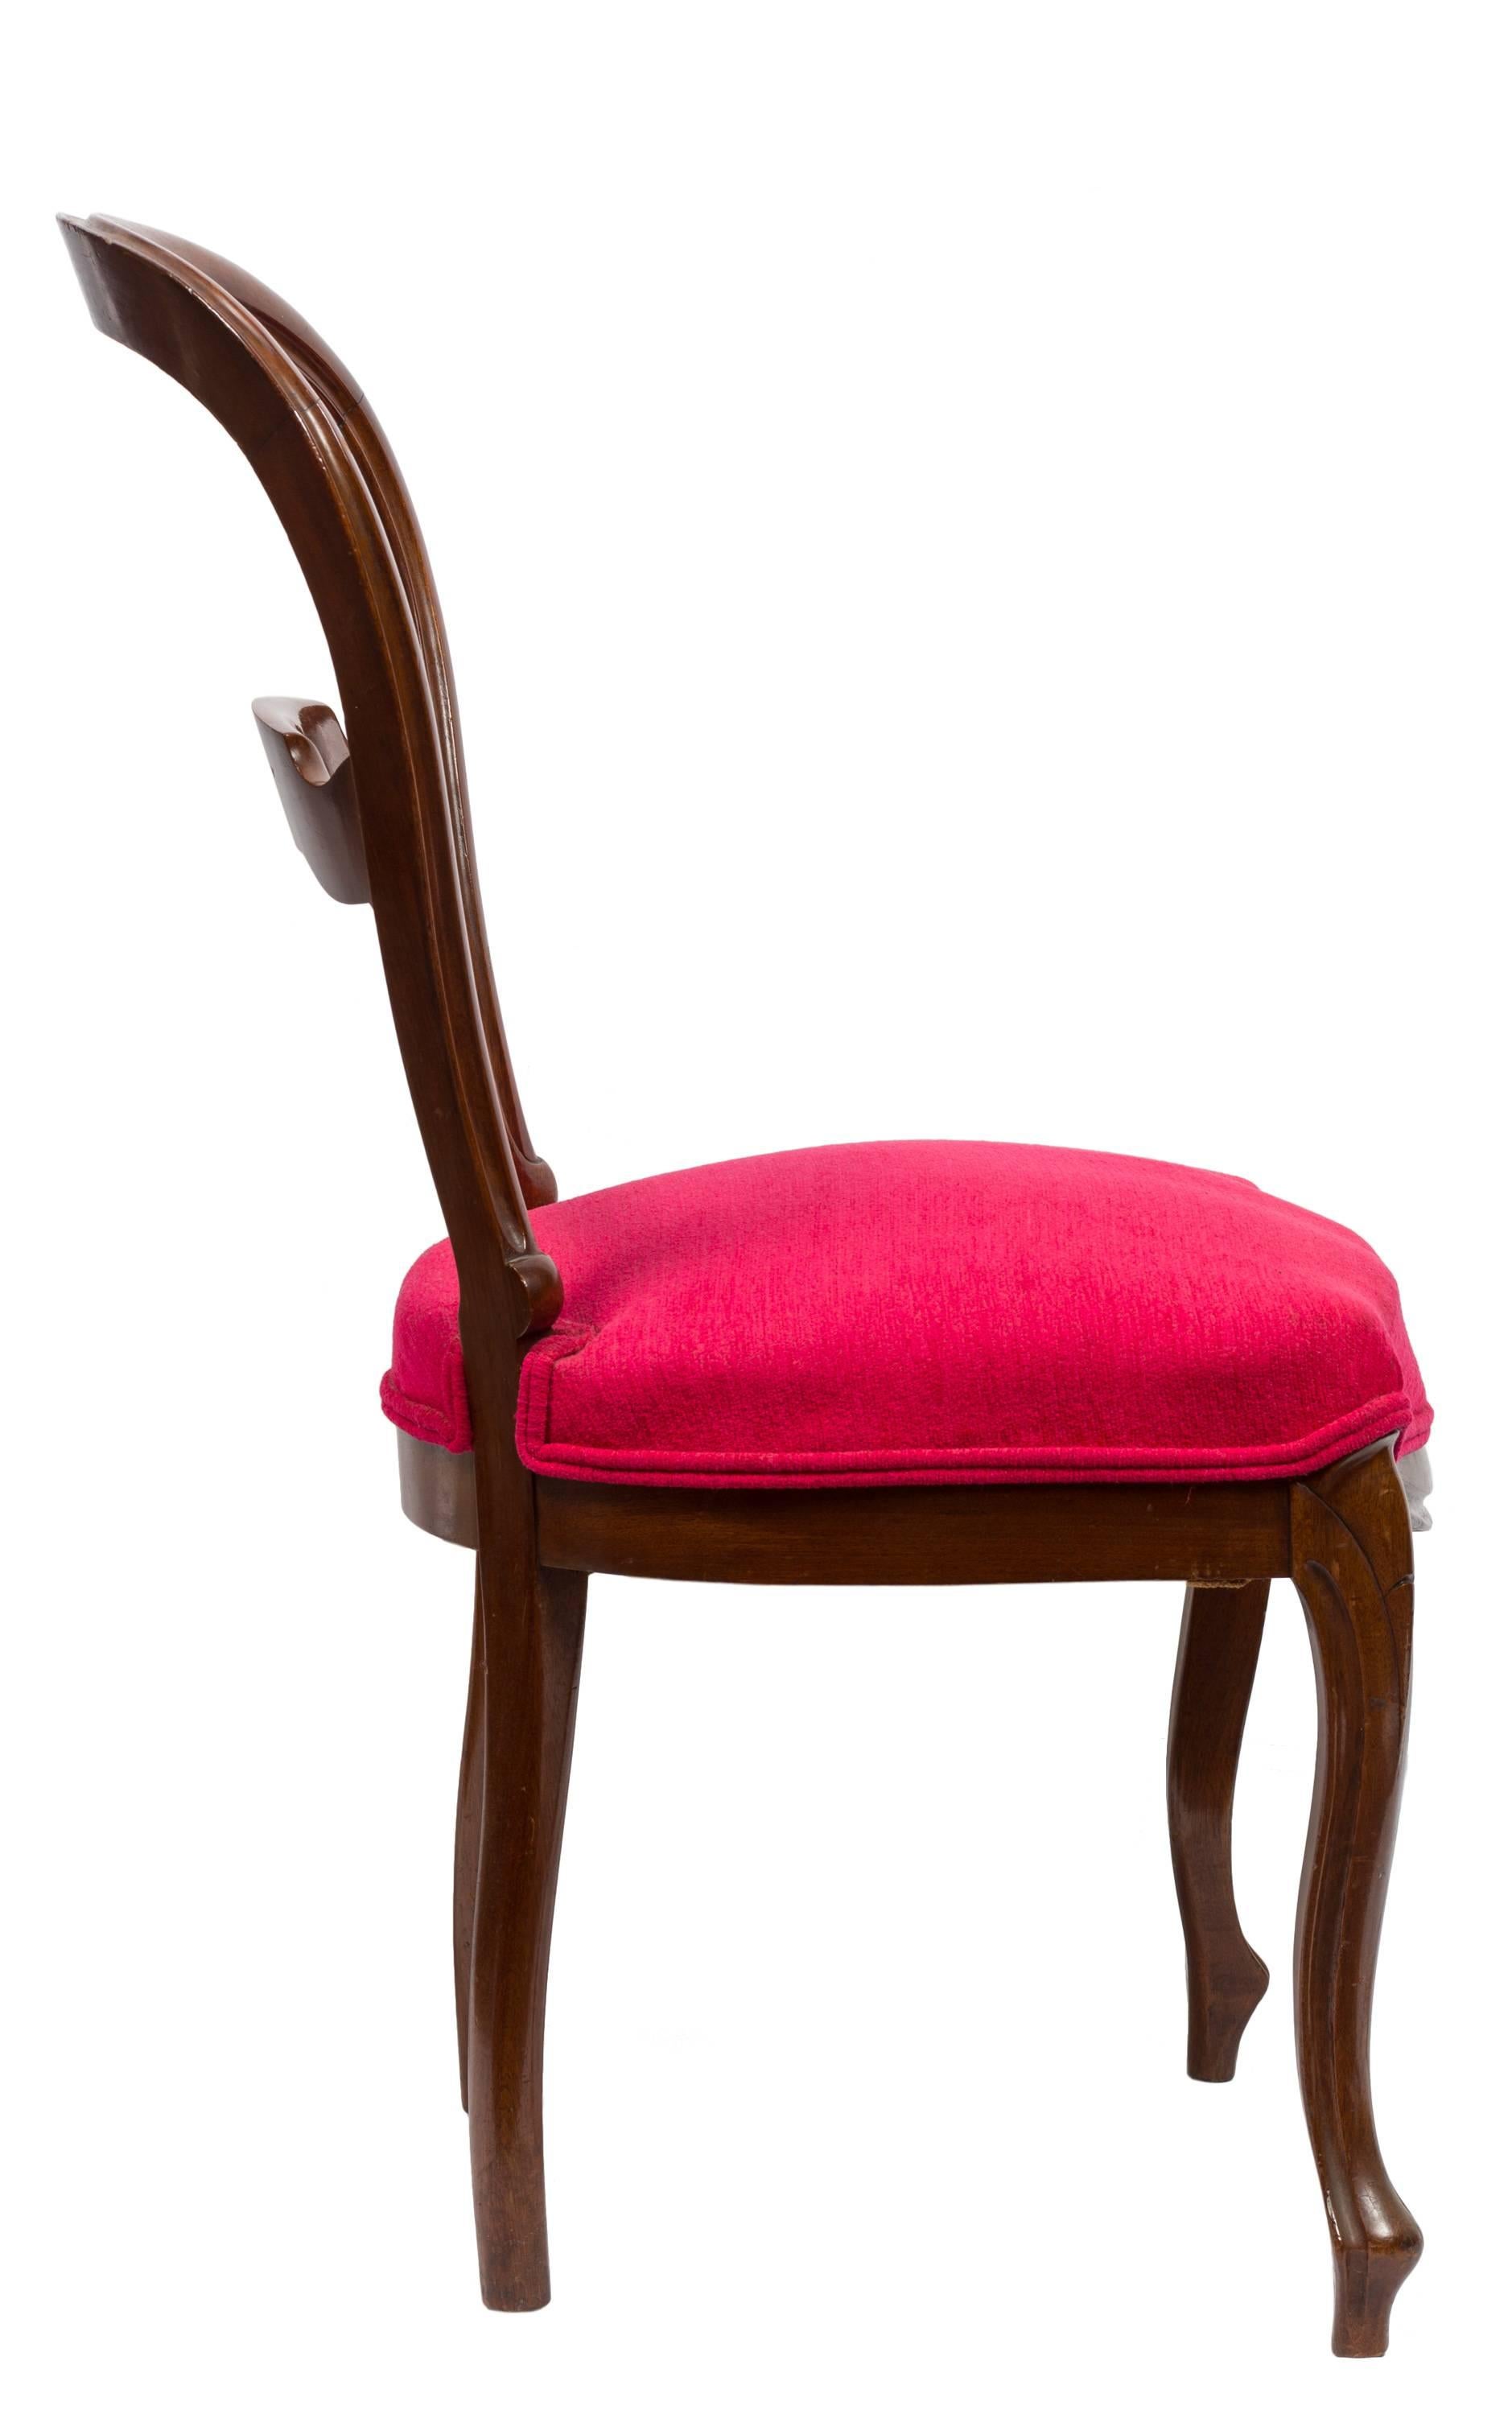 Victorian Pair of Unmatched 19th Century Walnut and Magenta Red Fabric Spanish Chairs